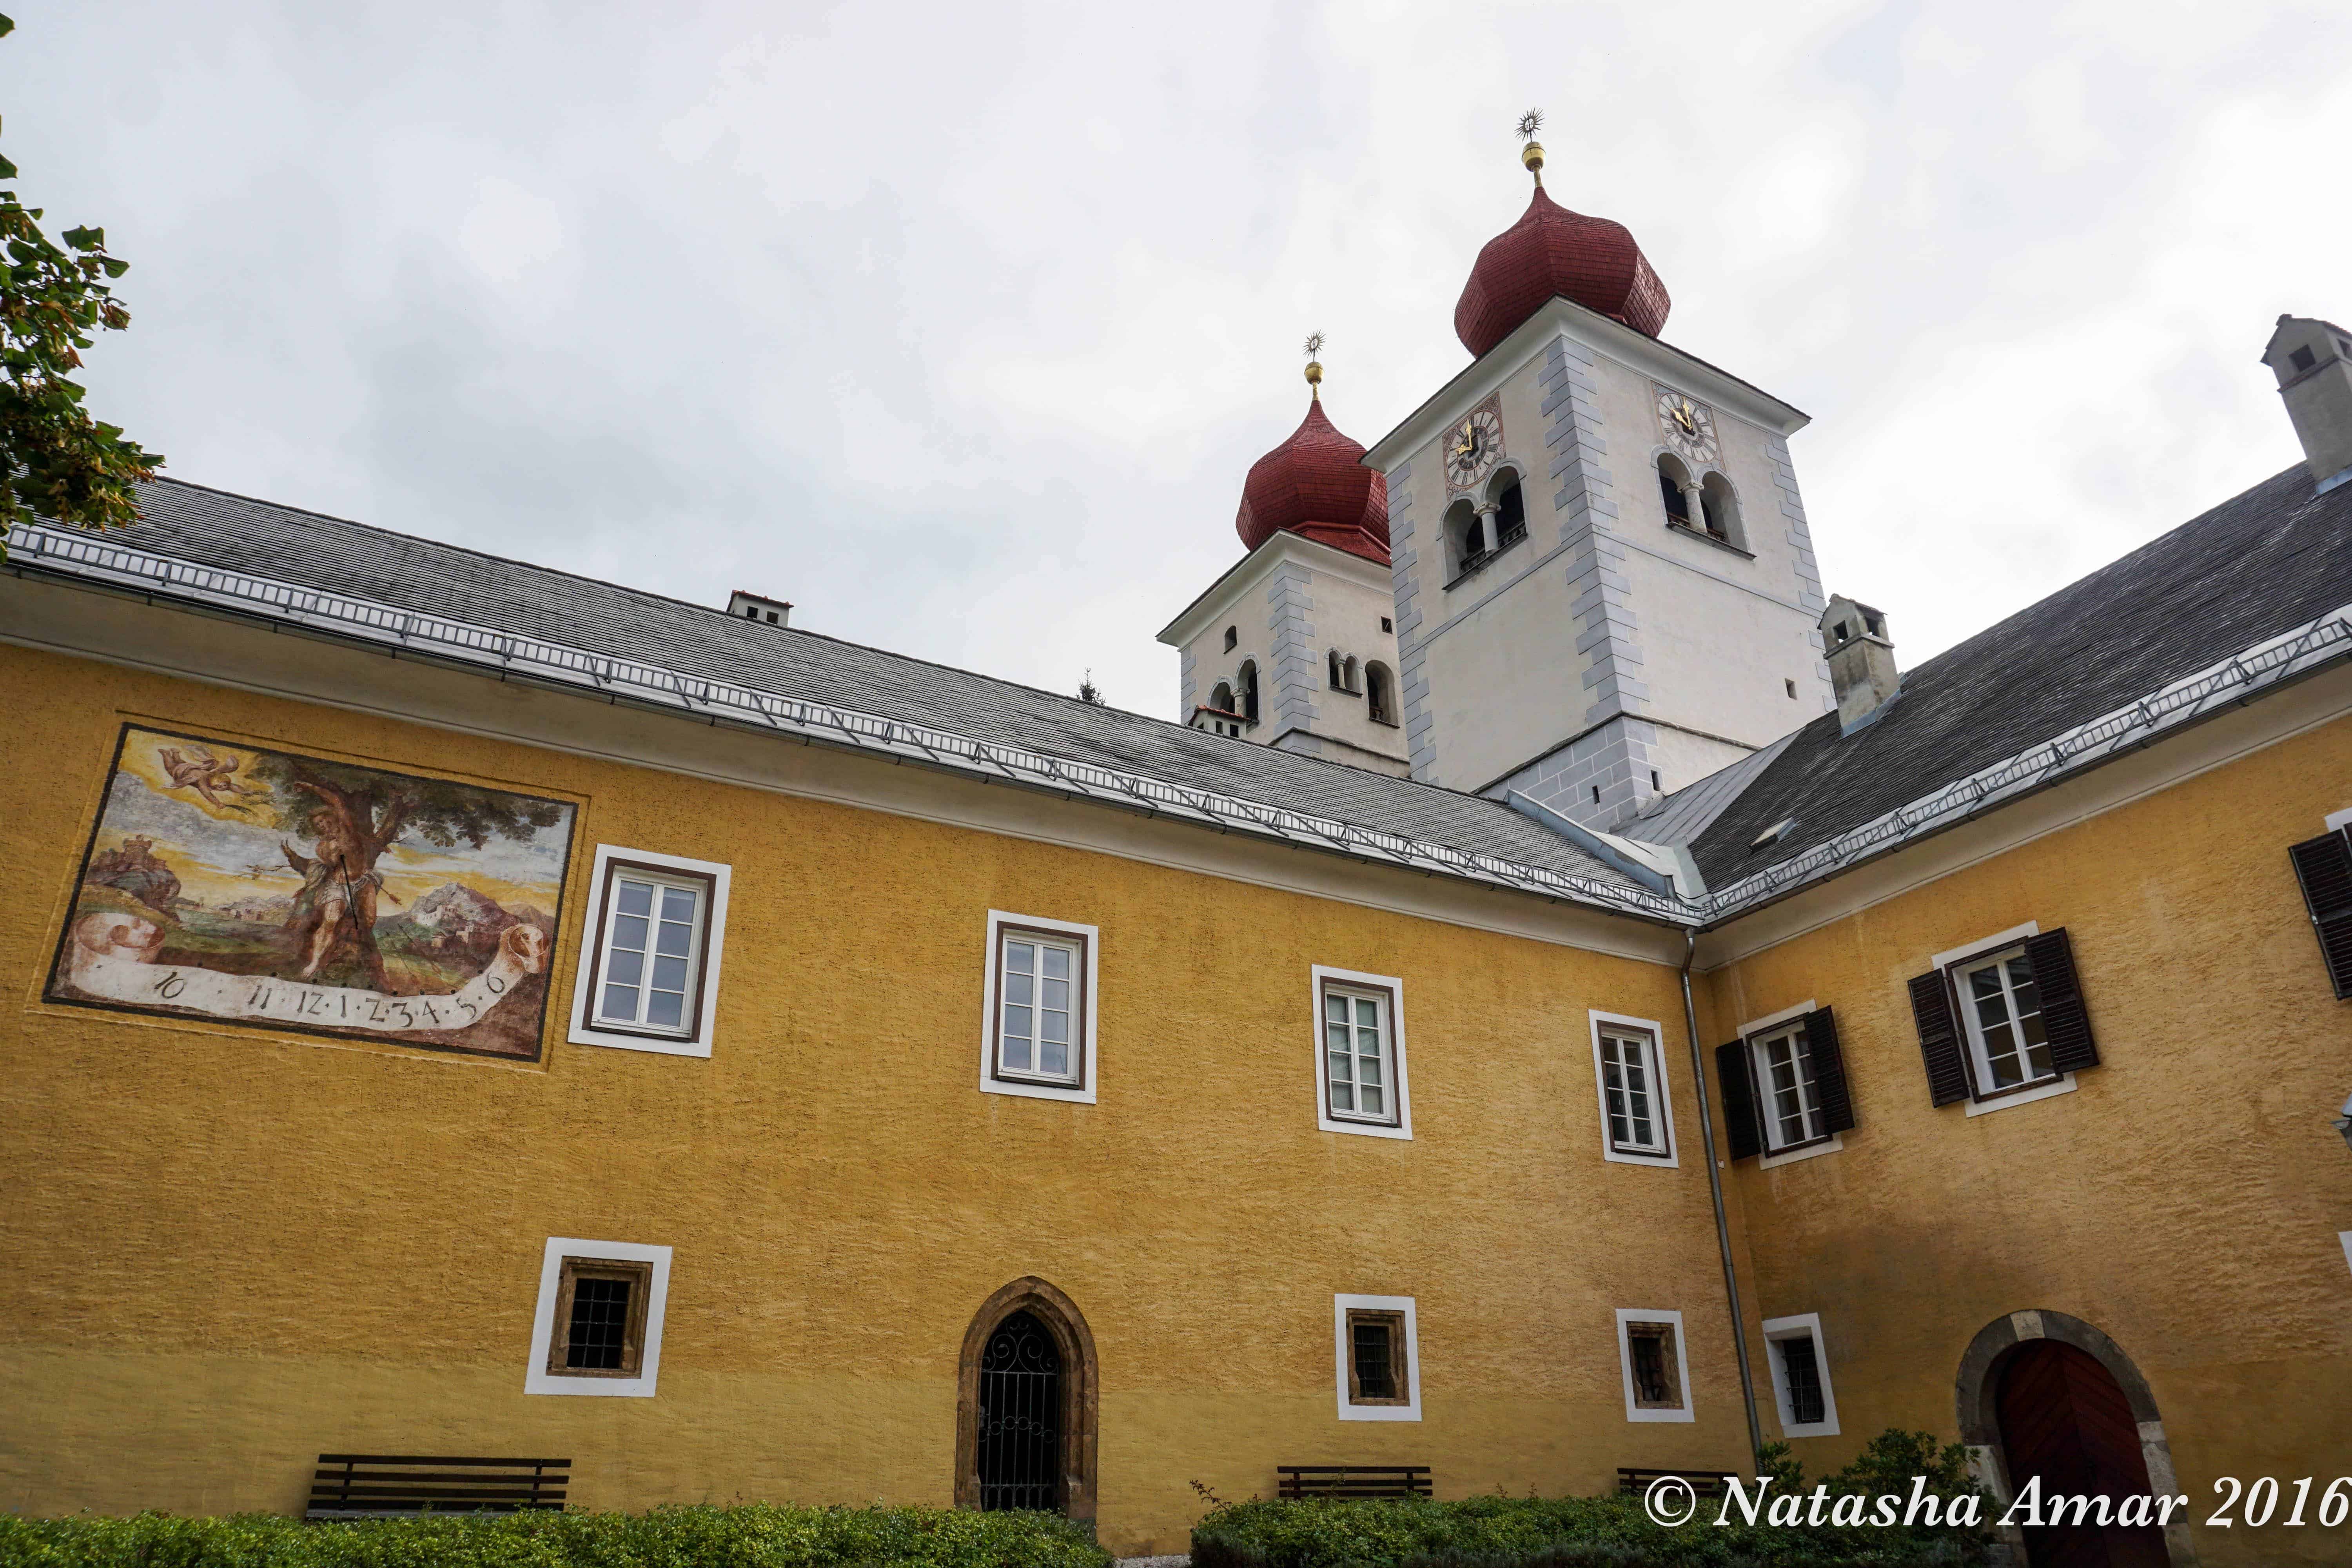 Millstatt Abbey: Transromanica Cultural Route of the Council of Europe